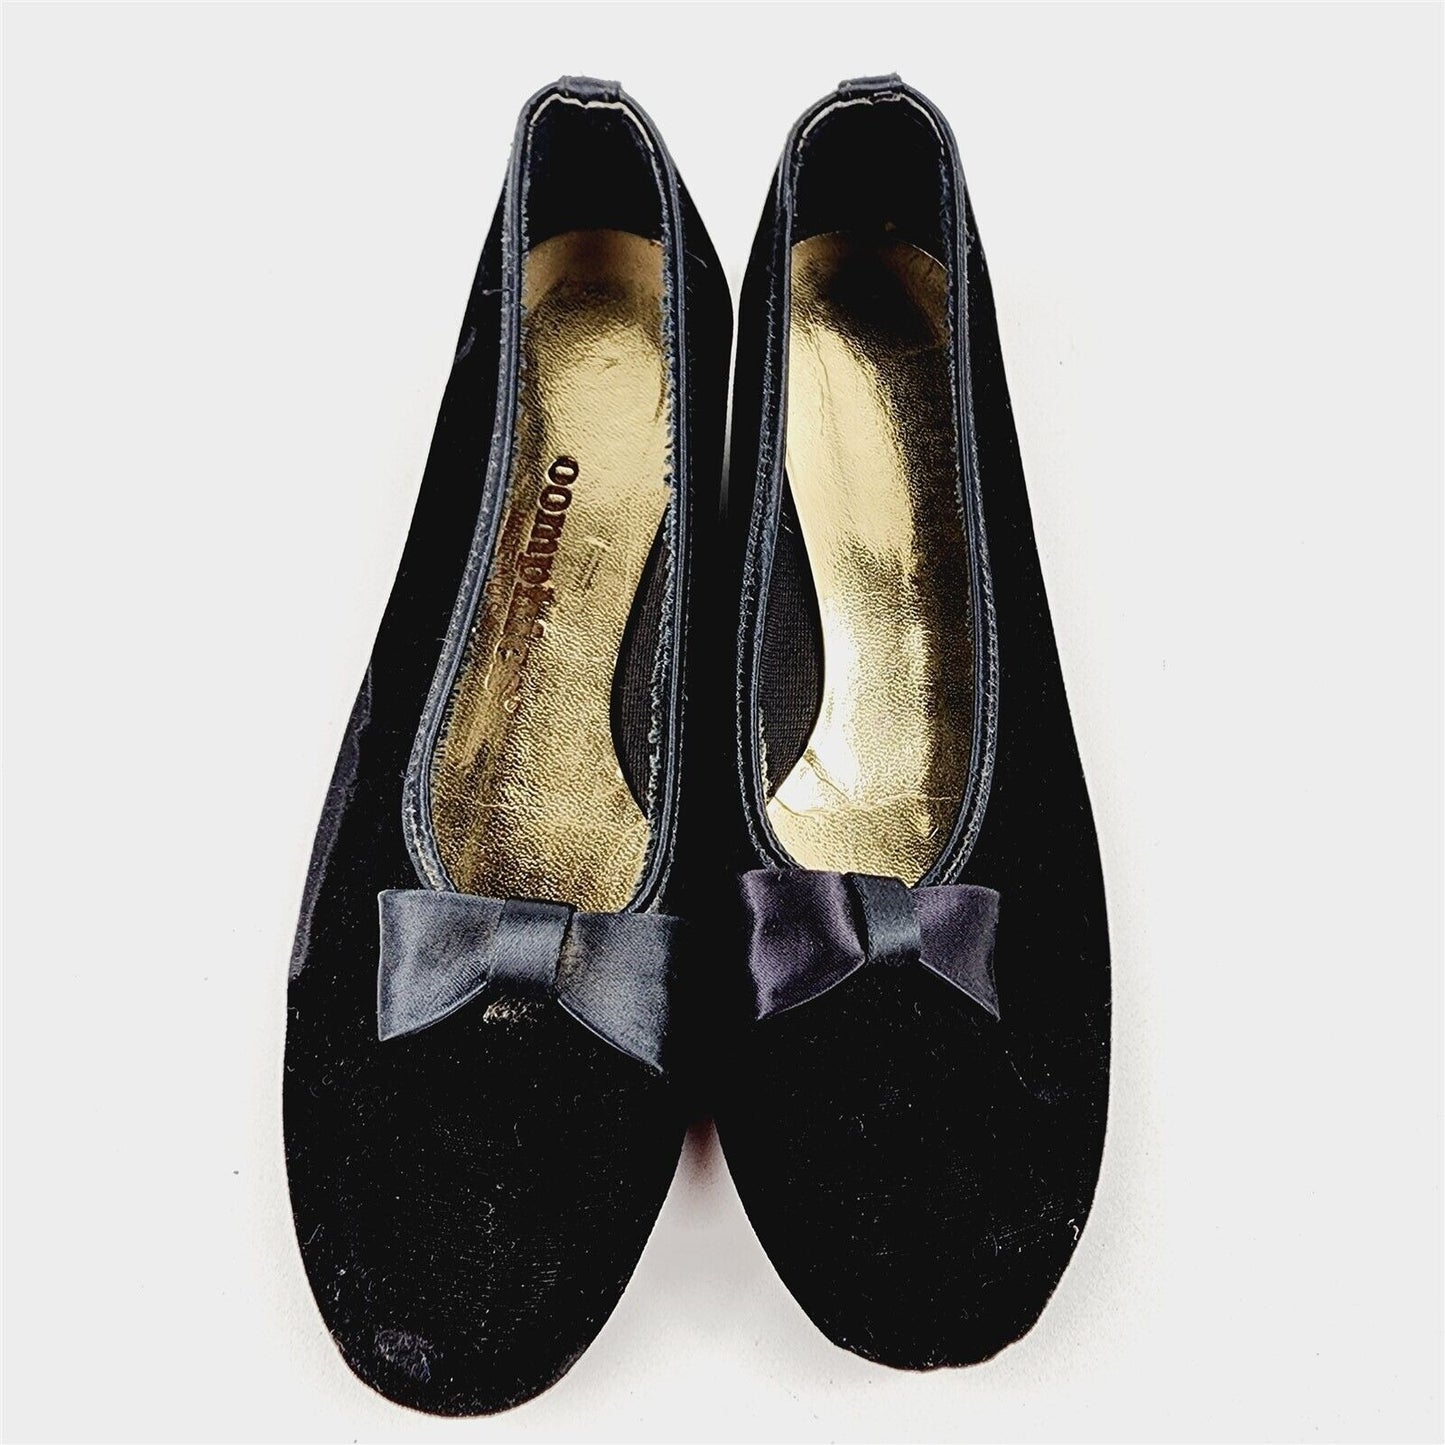 Vintage Oomphies Black Velvet Slippers House Shoes Bow Womens Size 7